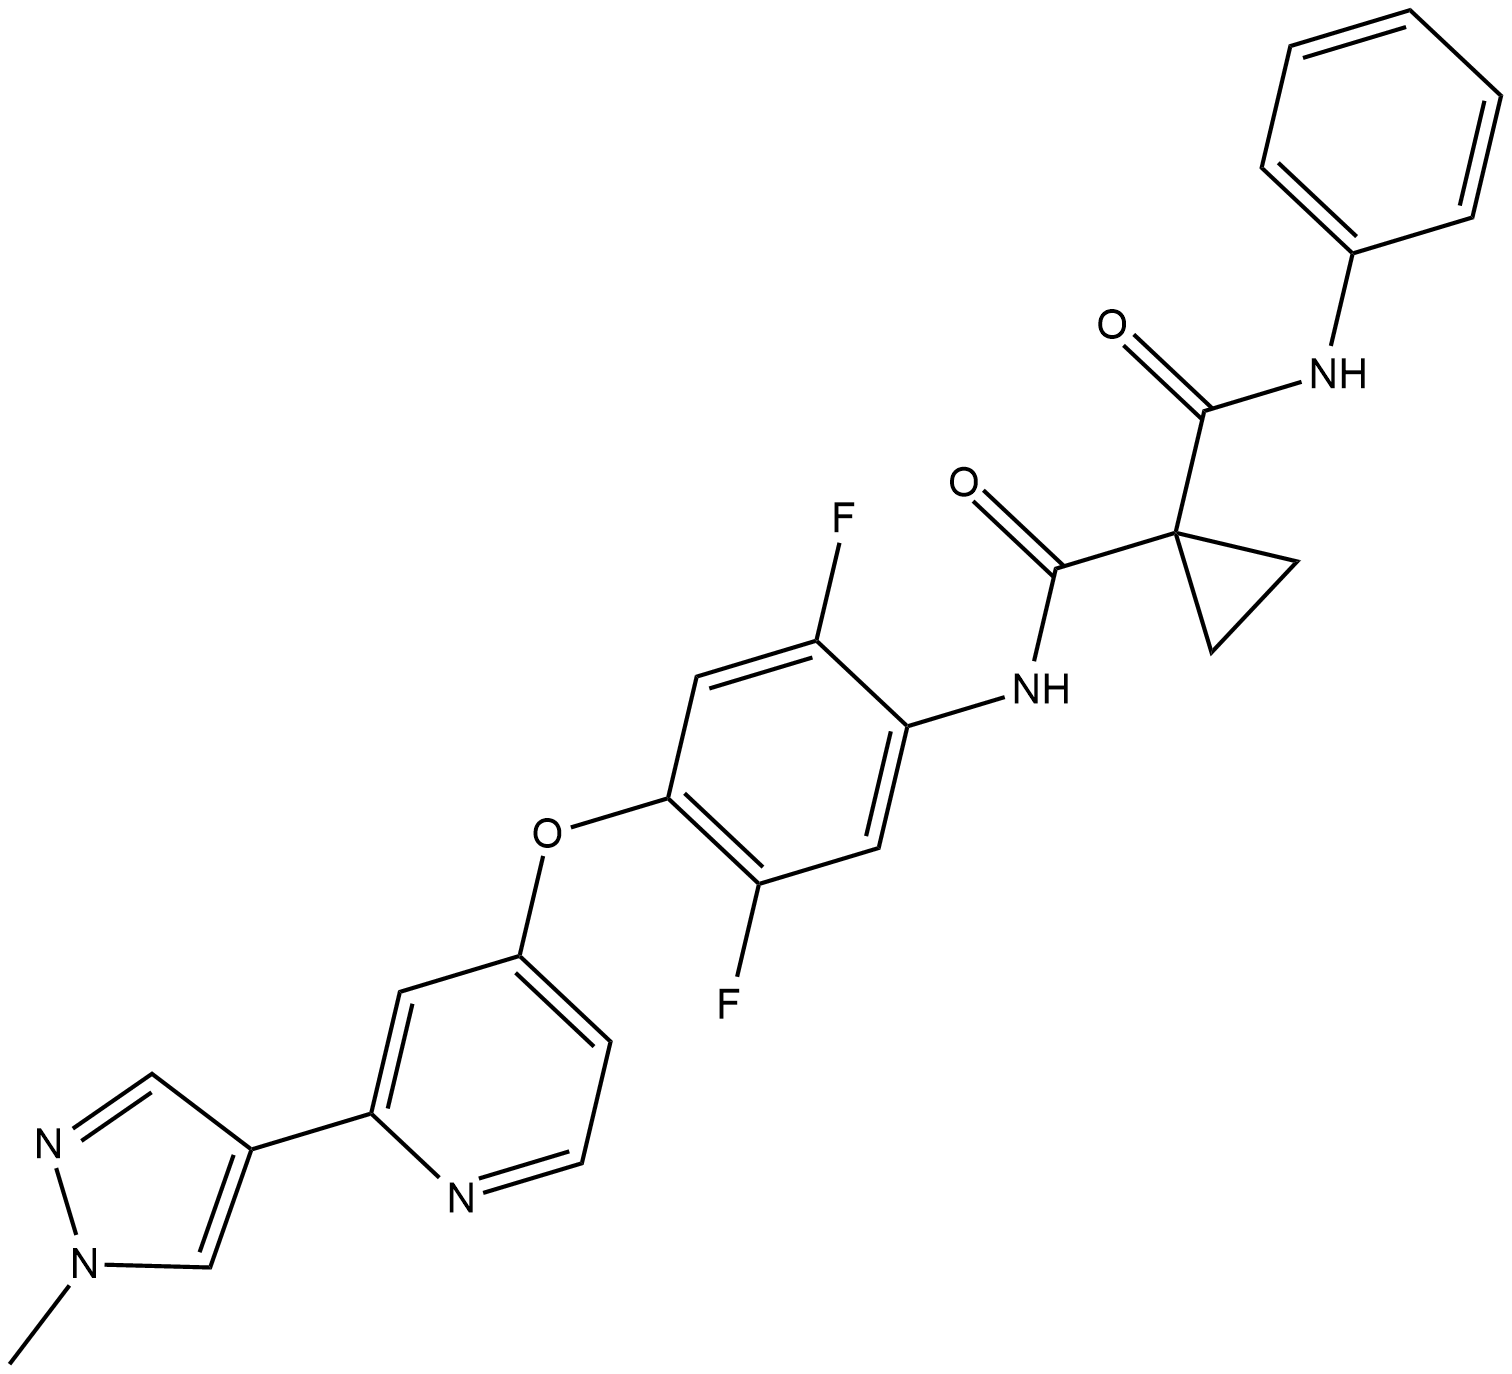 c-Kit-IN-1  Chemical Structure